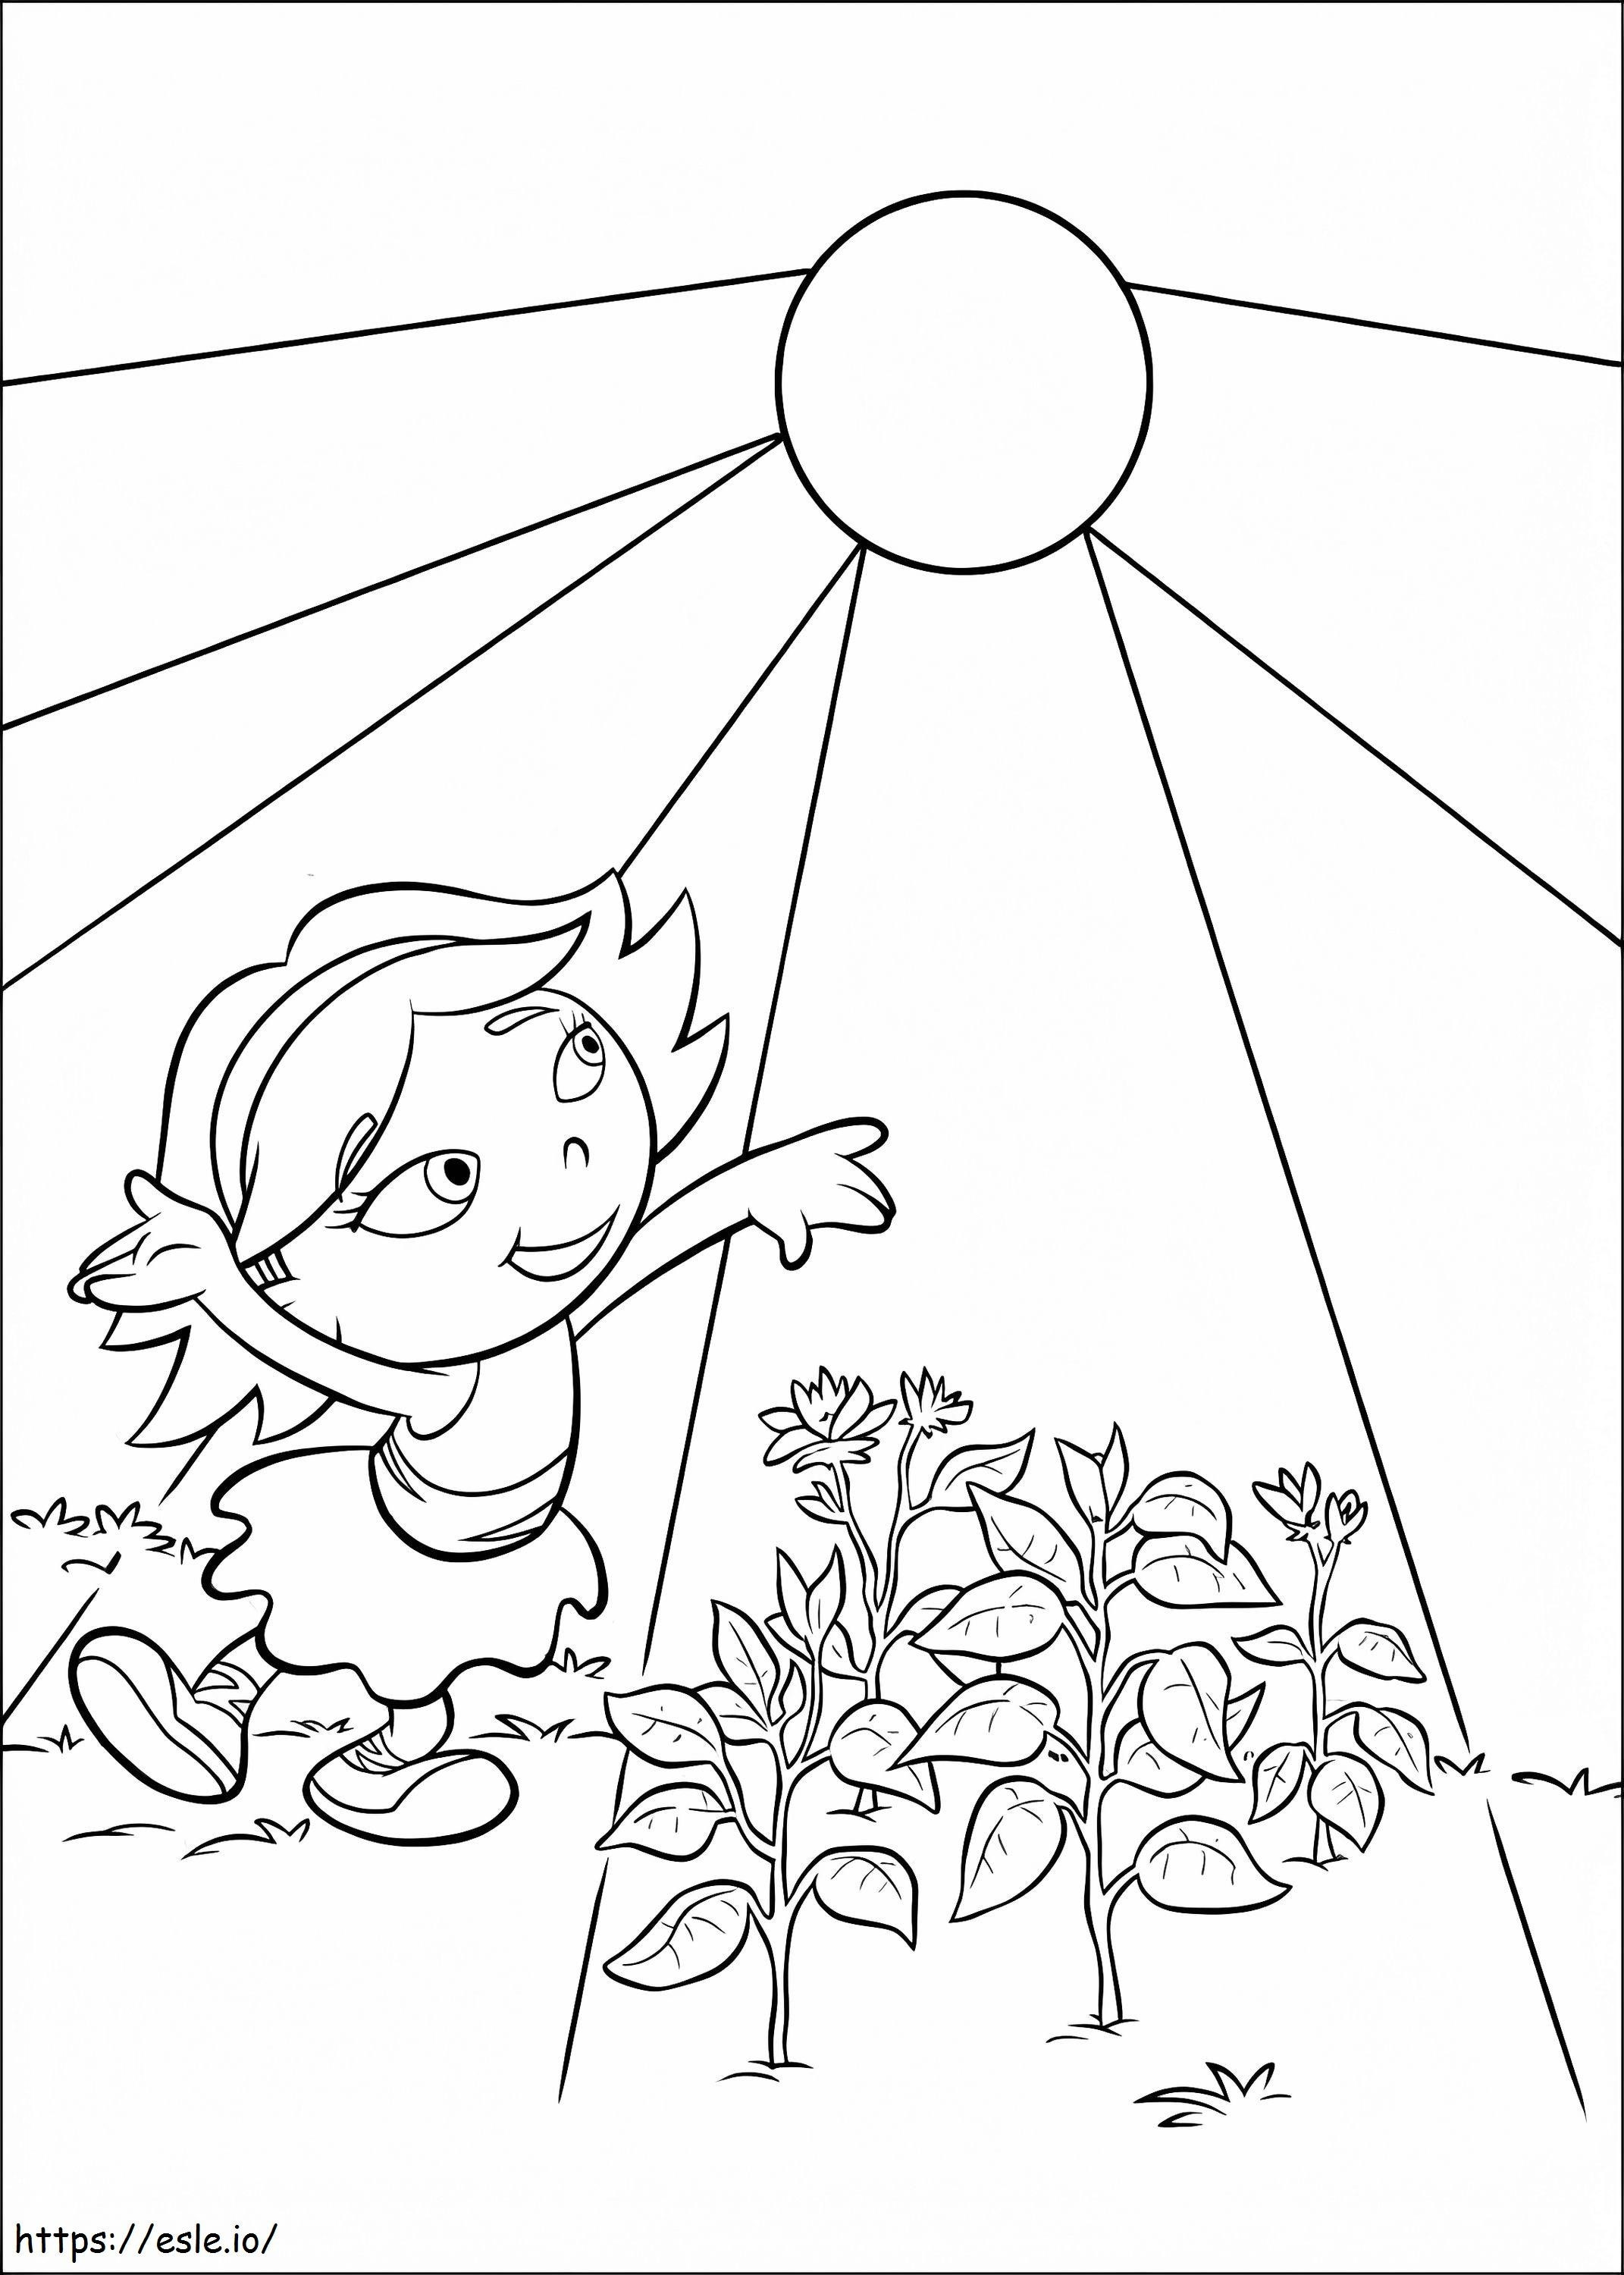 June From Little Einsteins coloring page